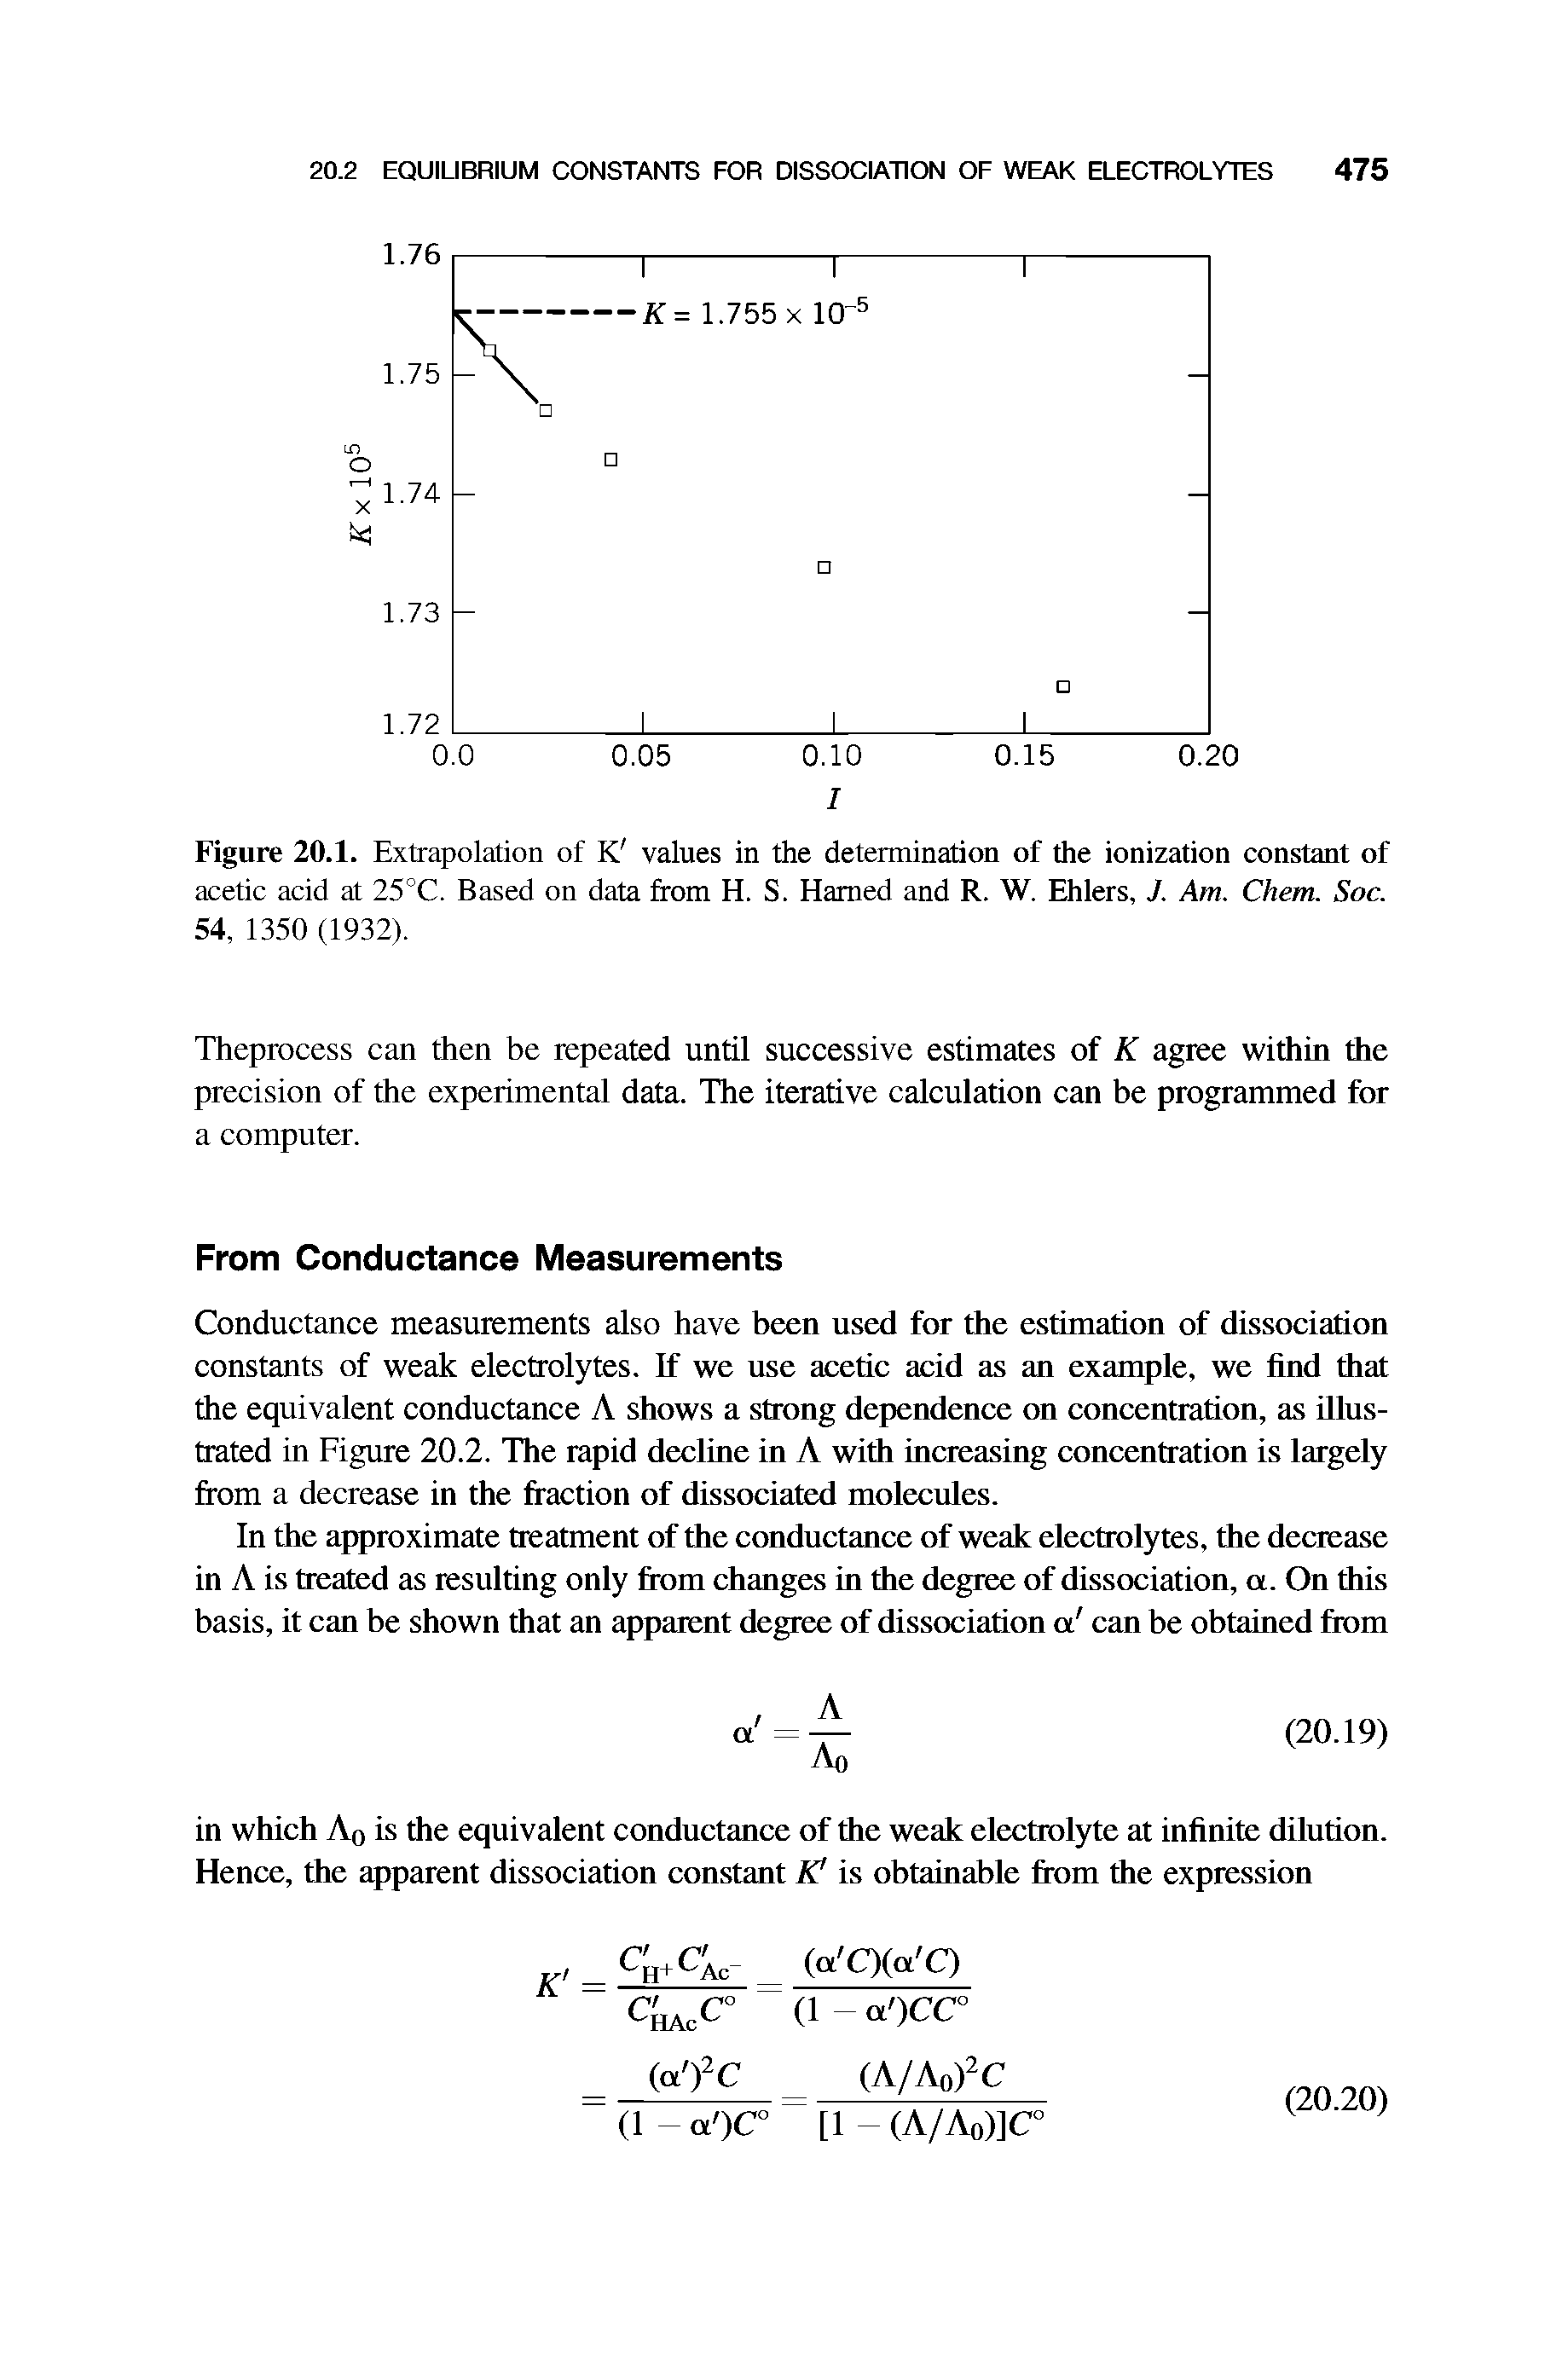 Figure 20.1. Extrapolation of K values in the determination of the ionization constant of acetic acid at 25°C. Based on data from H. S. Hamed and R. W. Ehlers, J. Am. Chem. Soc. 54, 1350 (1932).